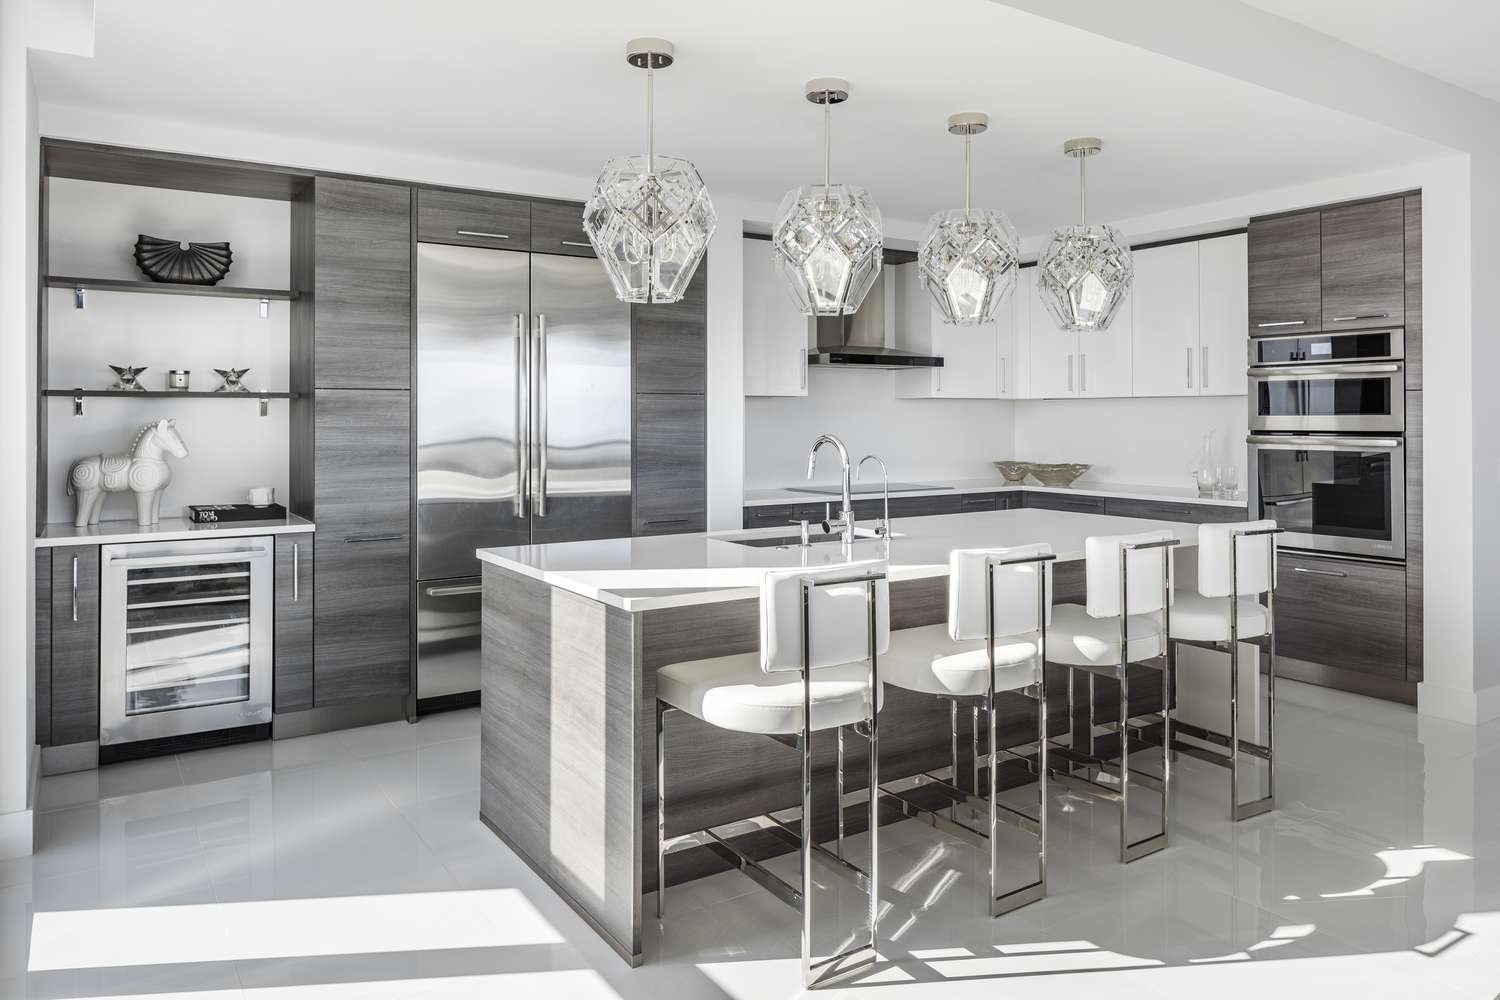 An all-gray kitchen has gray floors, gray cabinets, and a gray island